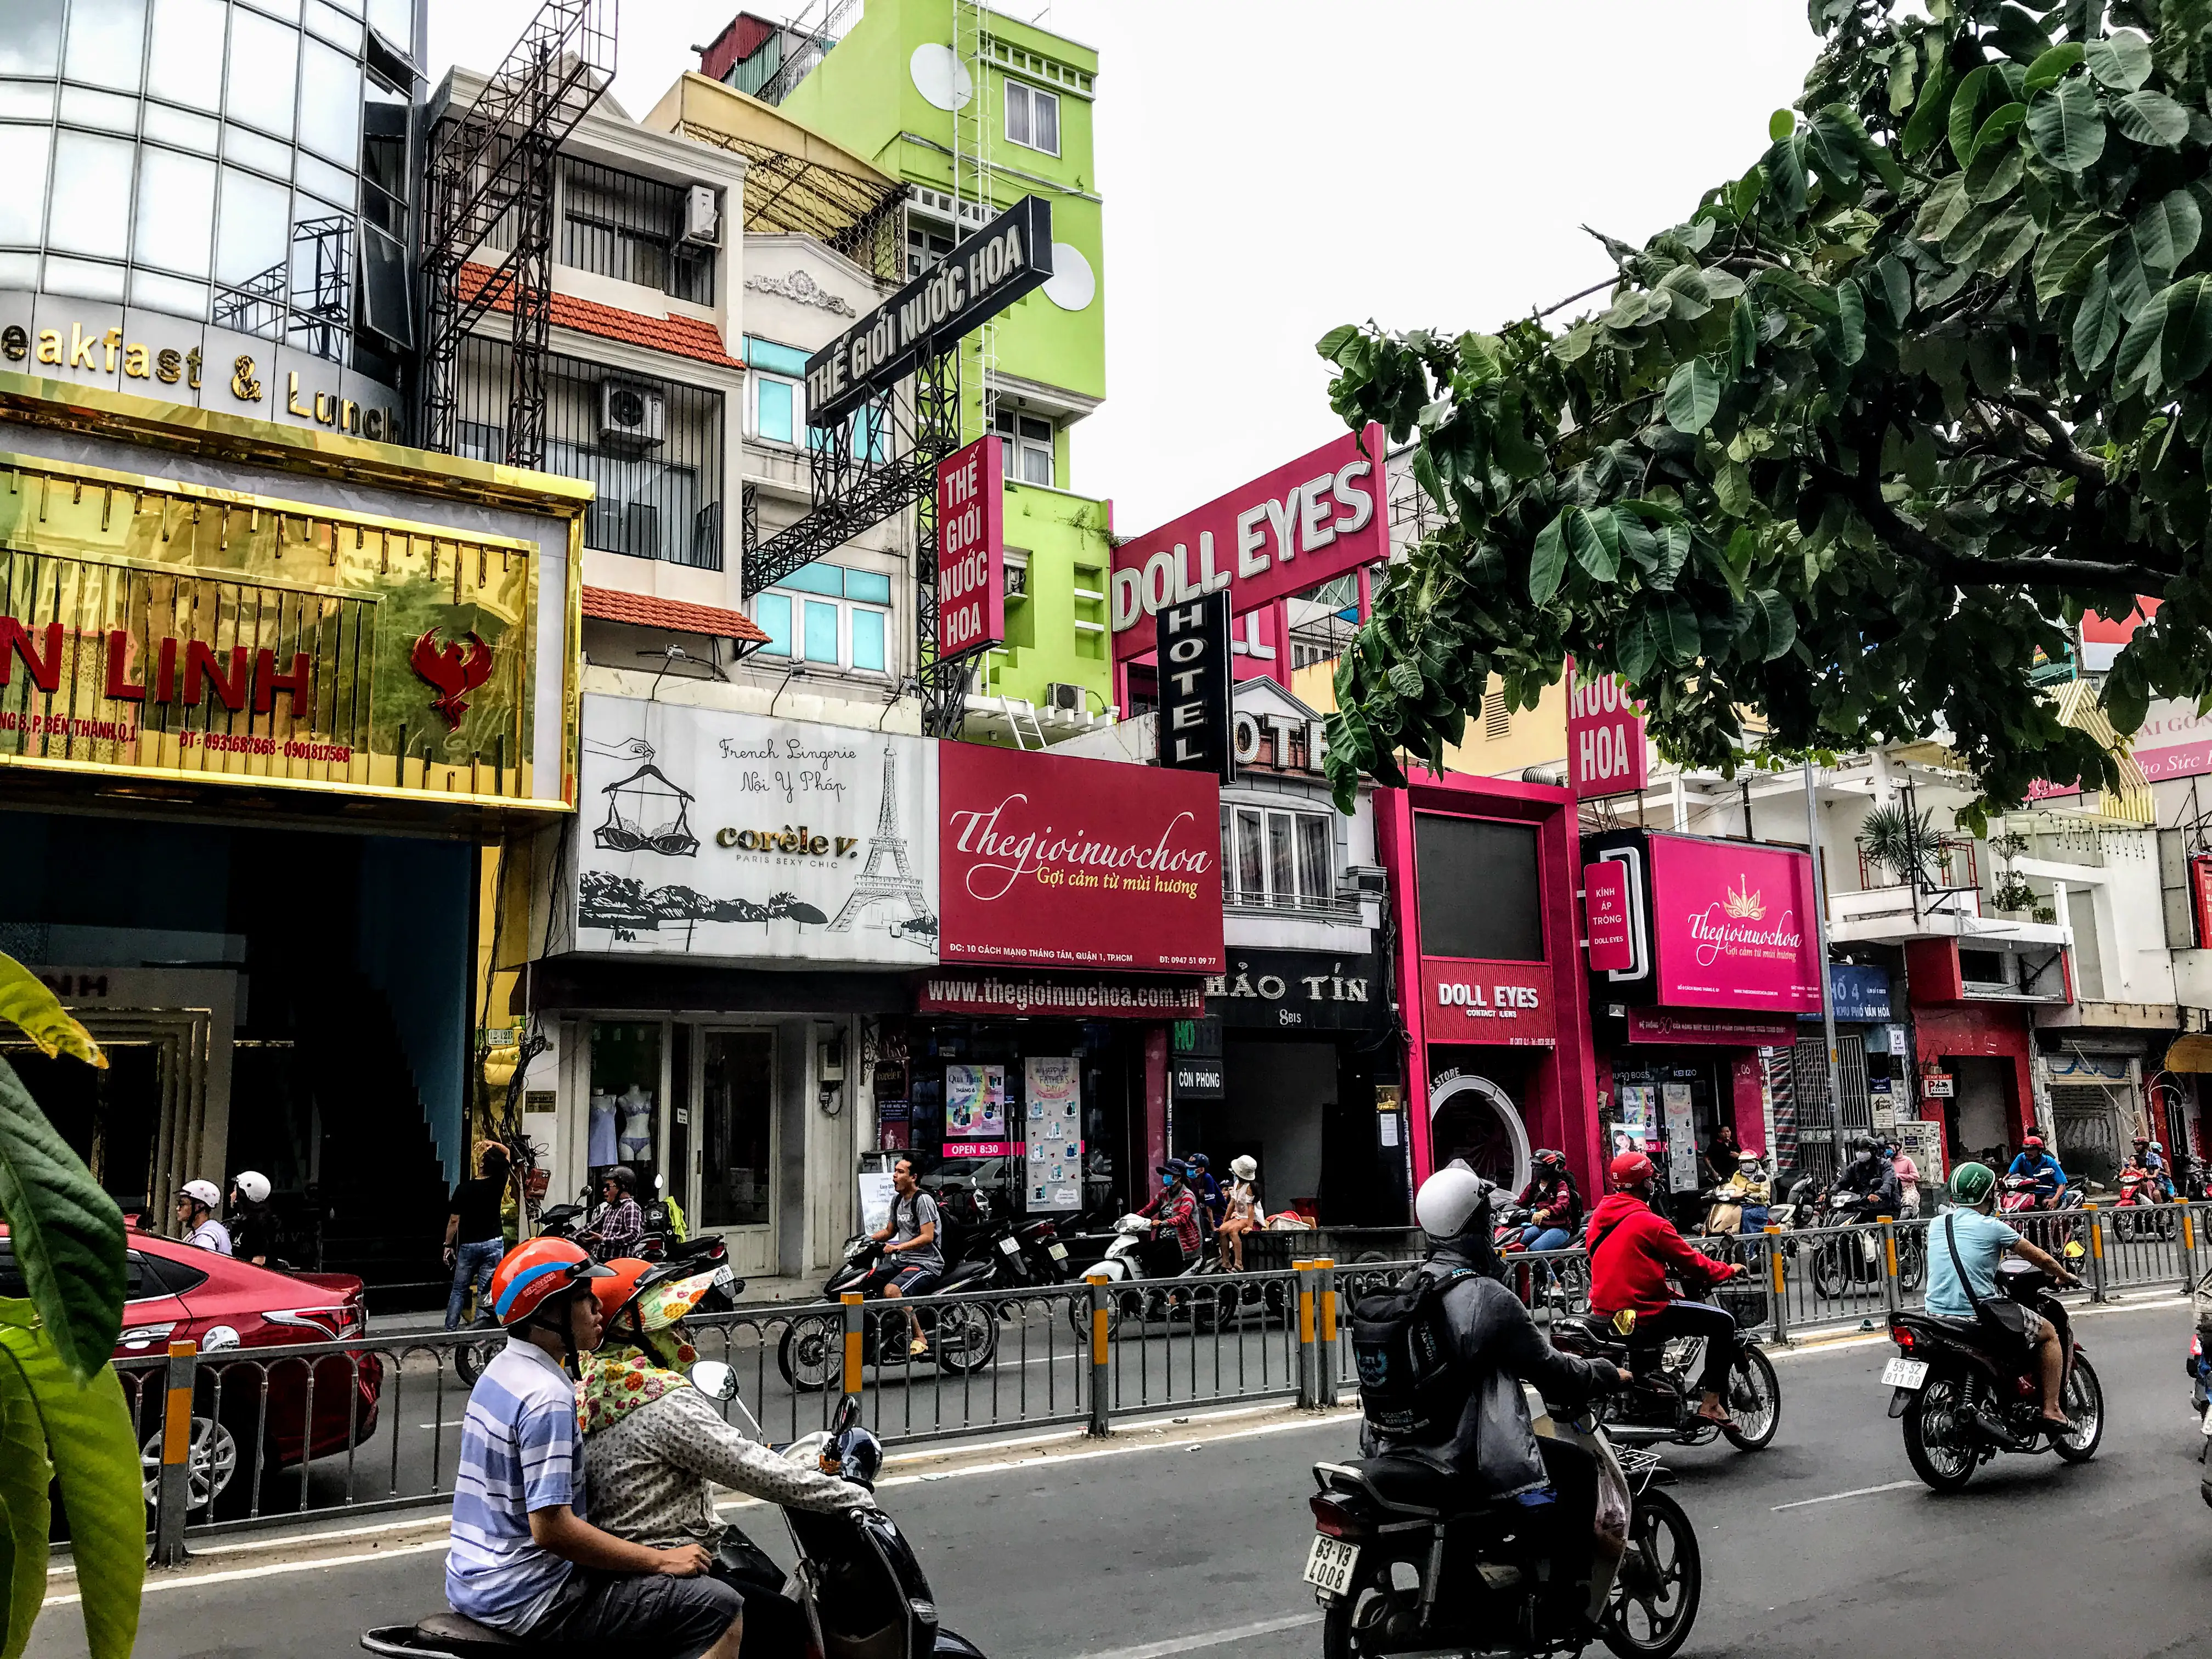 Ages for sex in Ho Chi Minh City